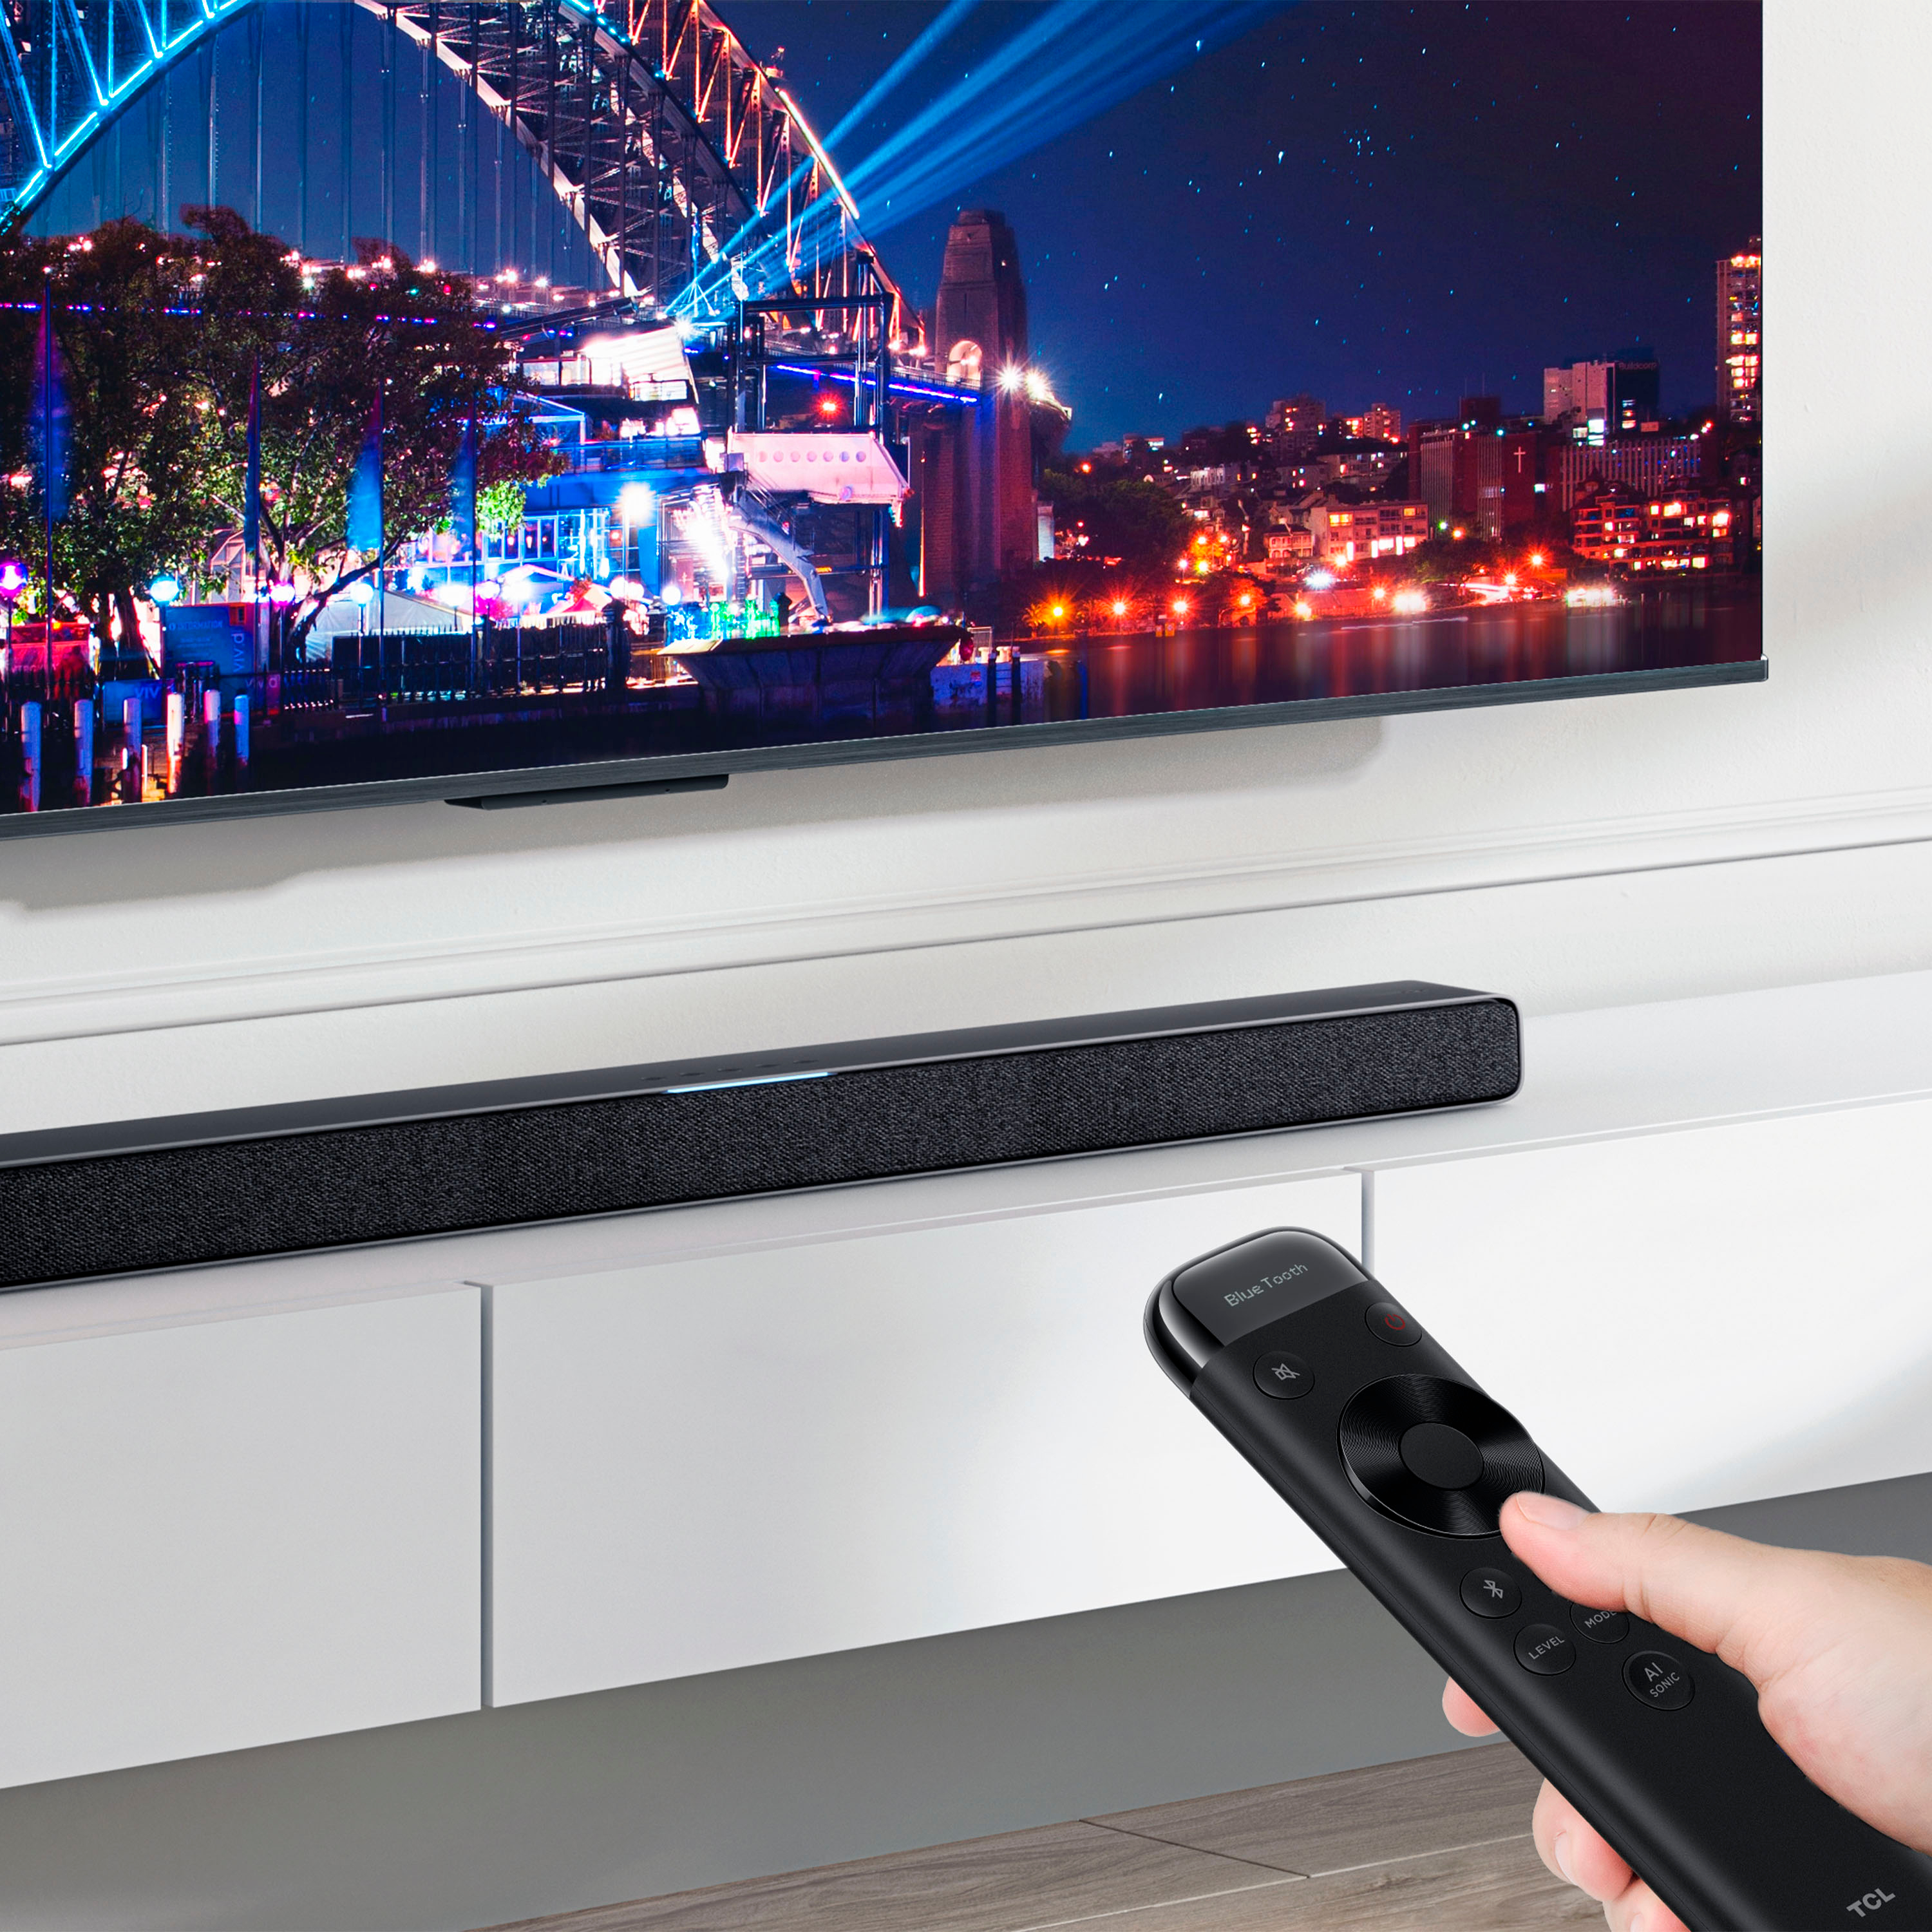 How to Connect to a Soundbar with a TCL TV